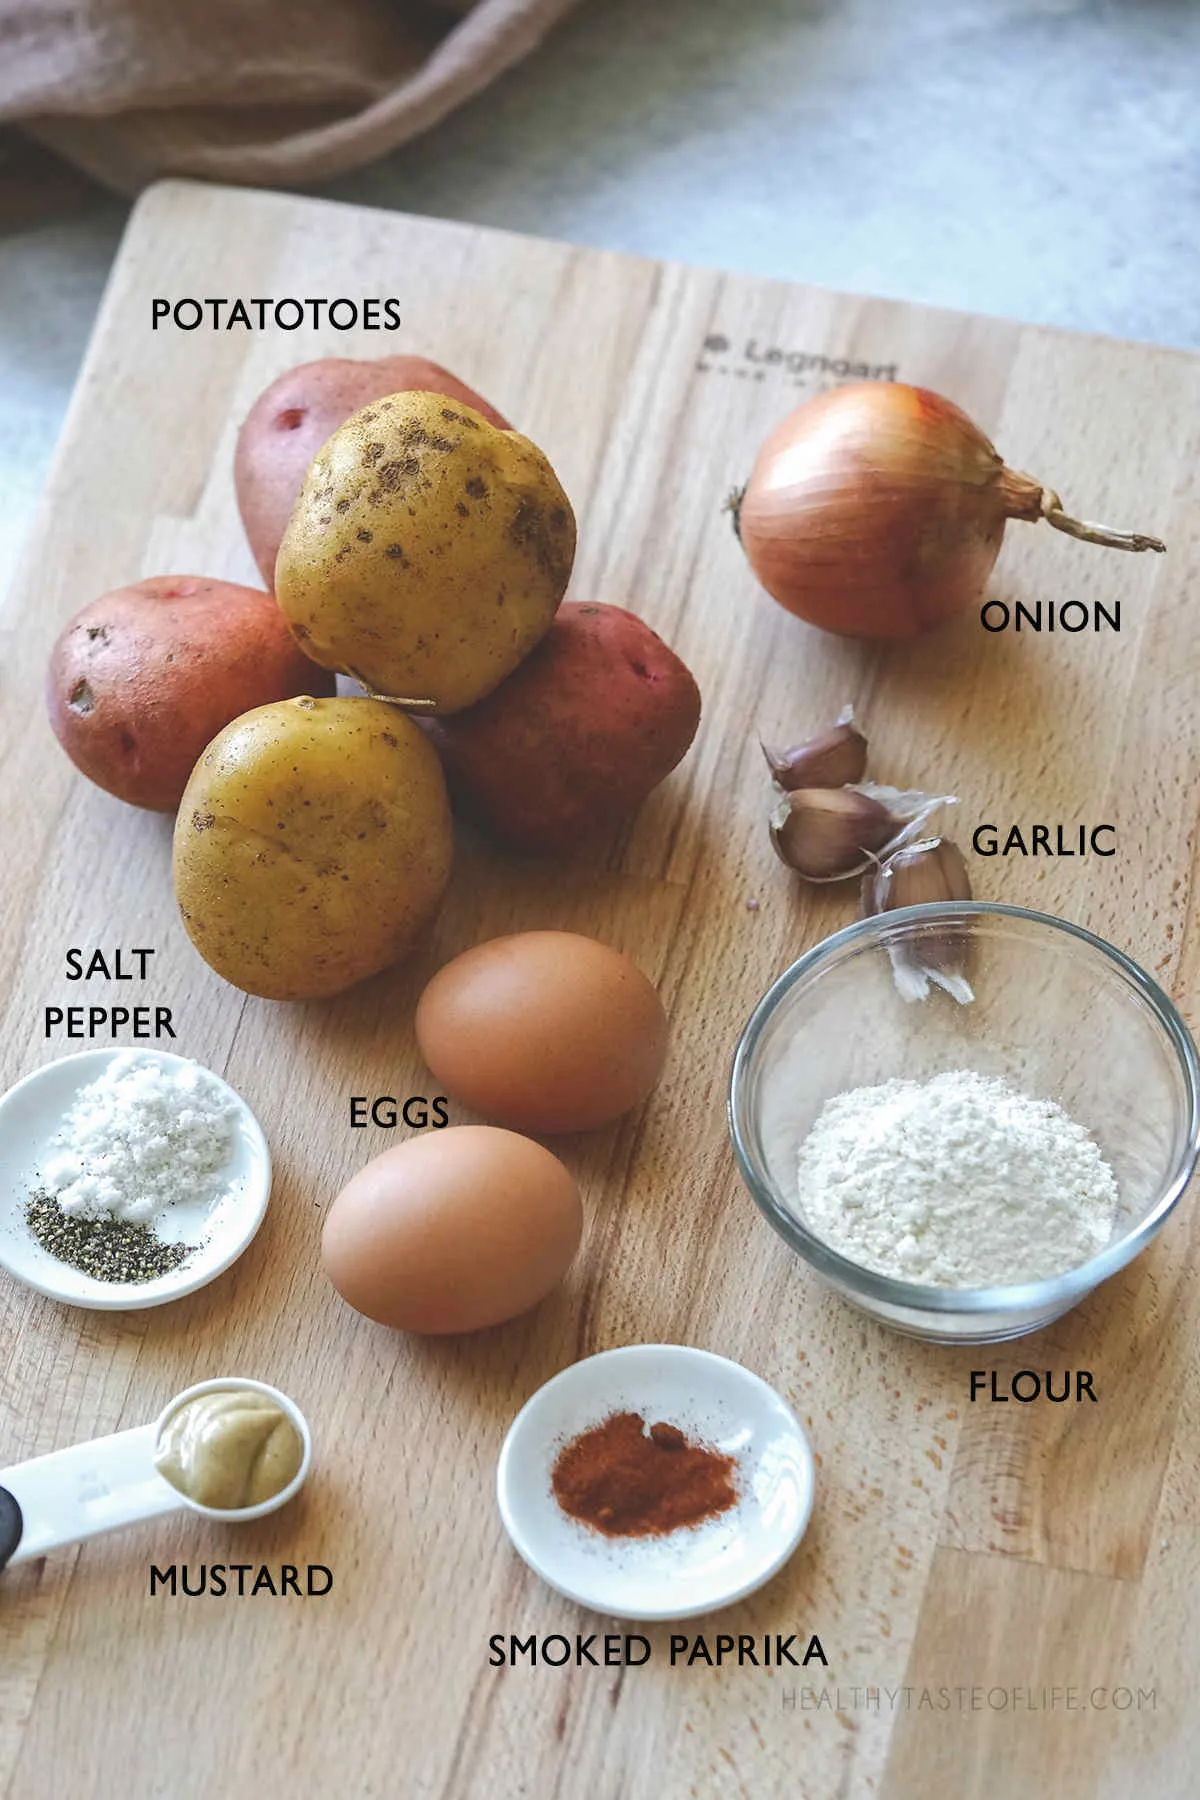 Ingredients for potato fritters displayed on a board.